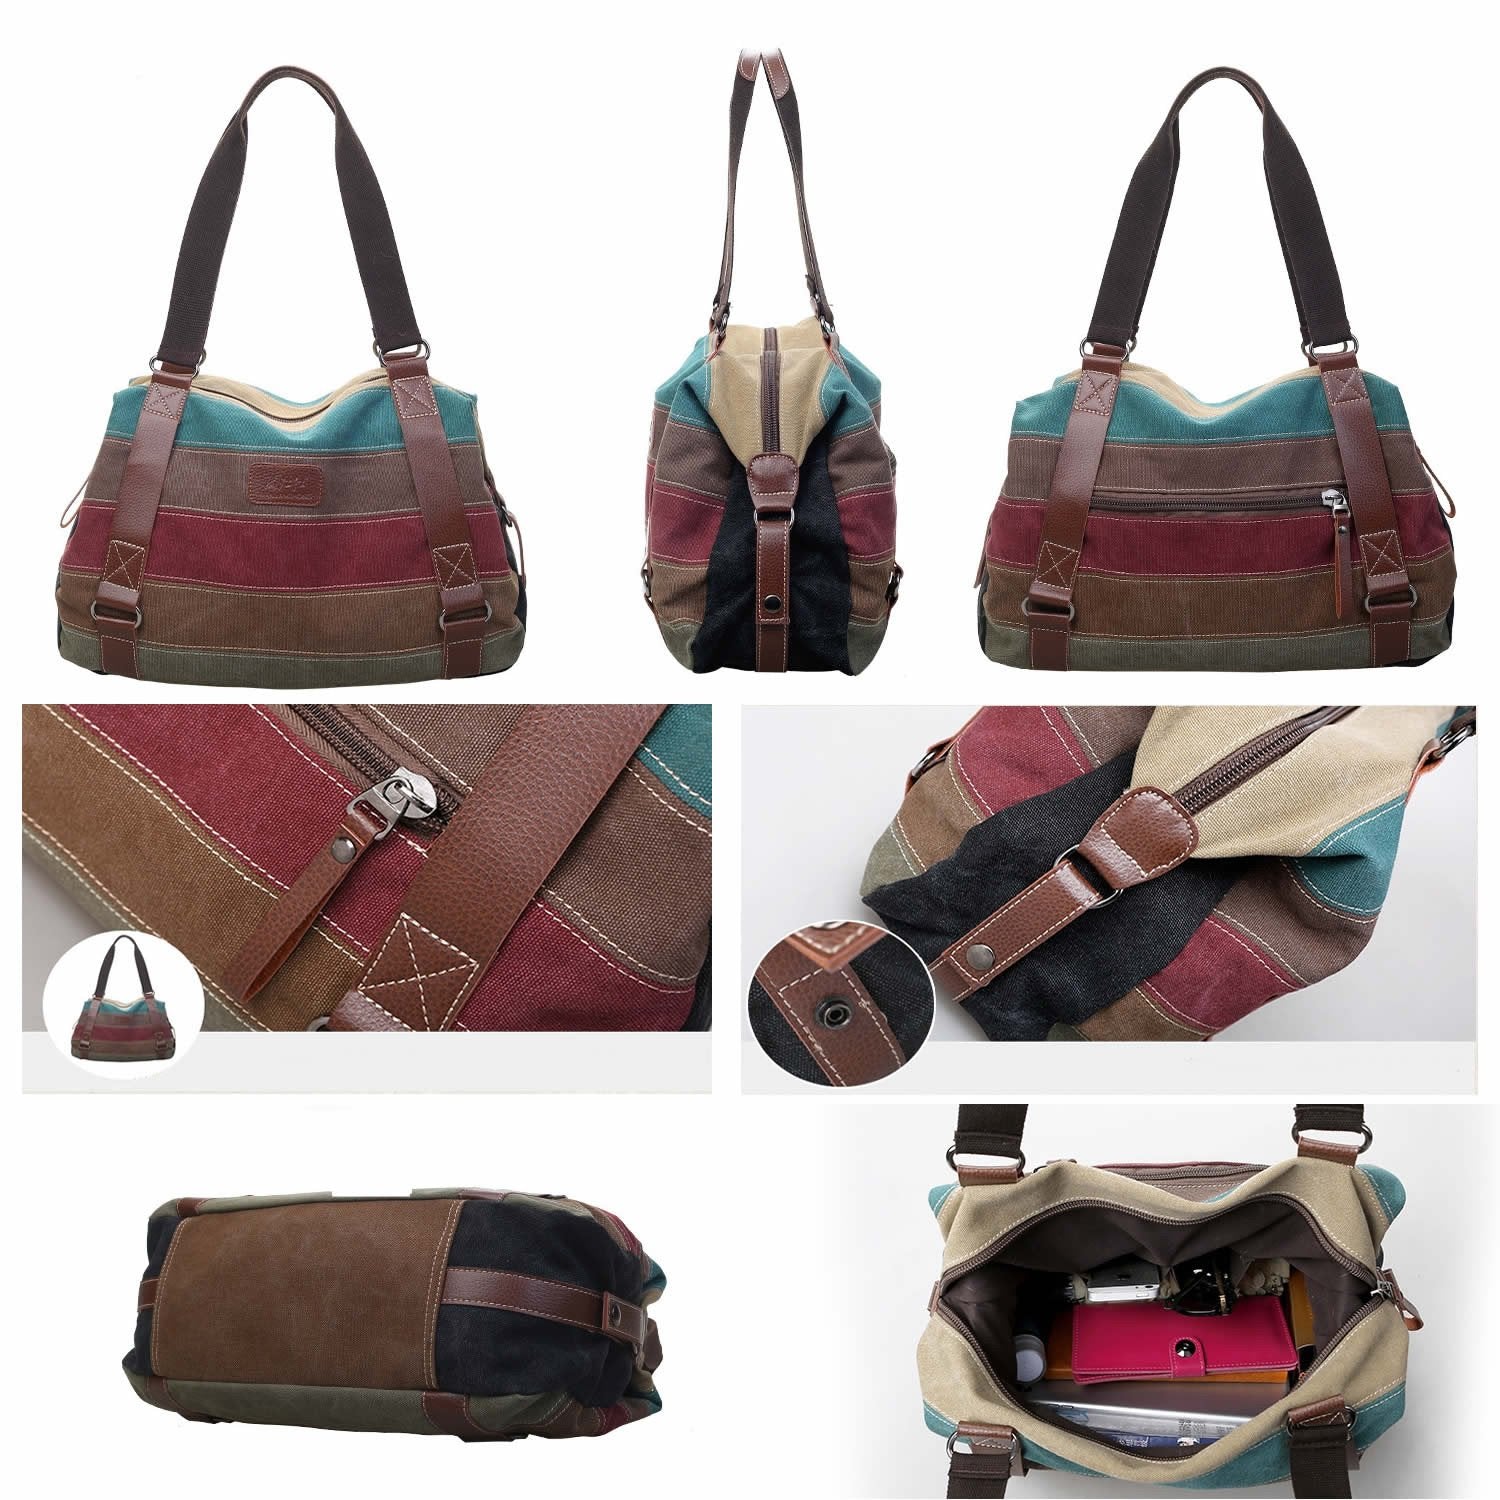 VIVA VOYAGE Canvas Shoulder Bag From Journey Collection with FREE GIFT